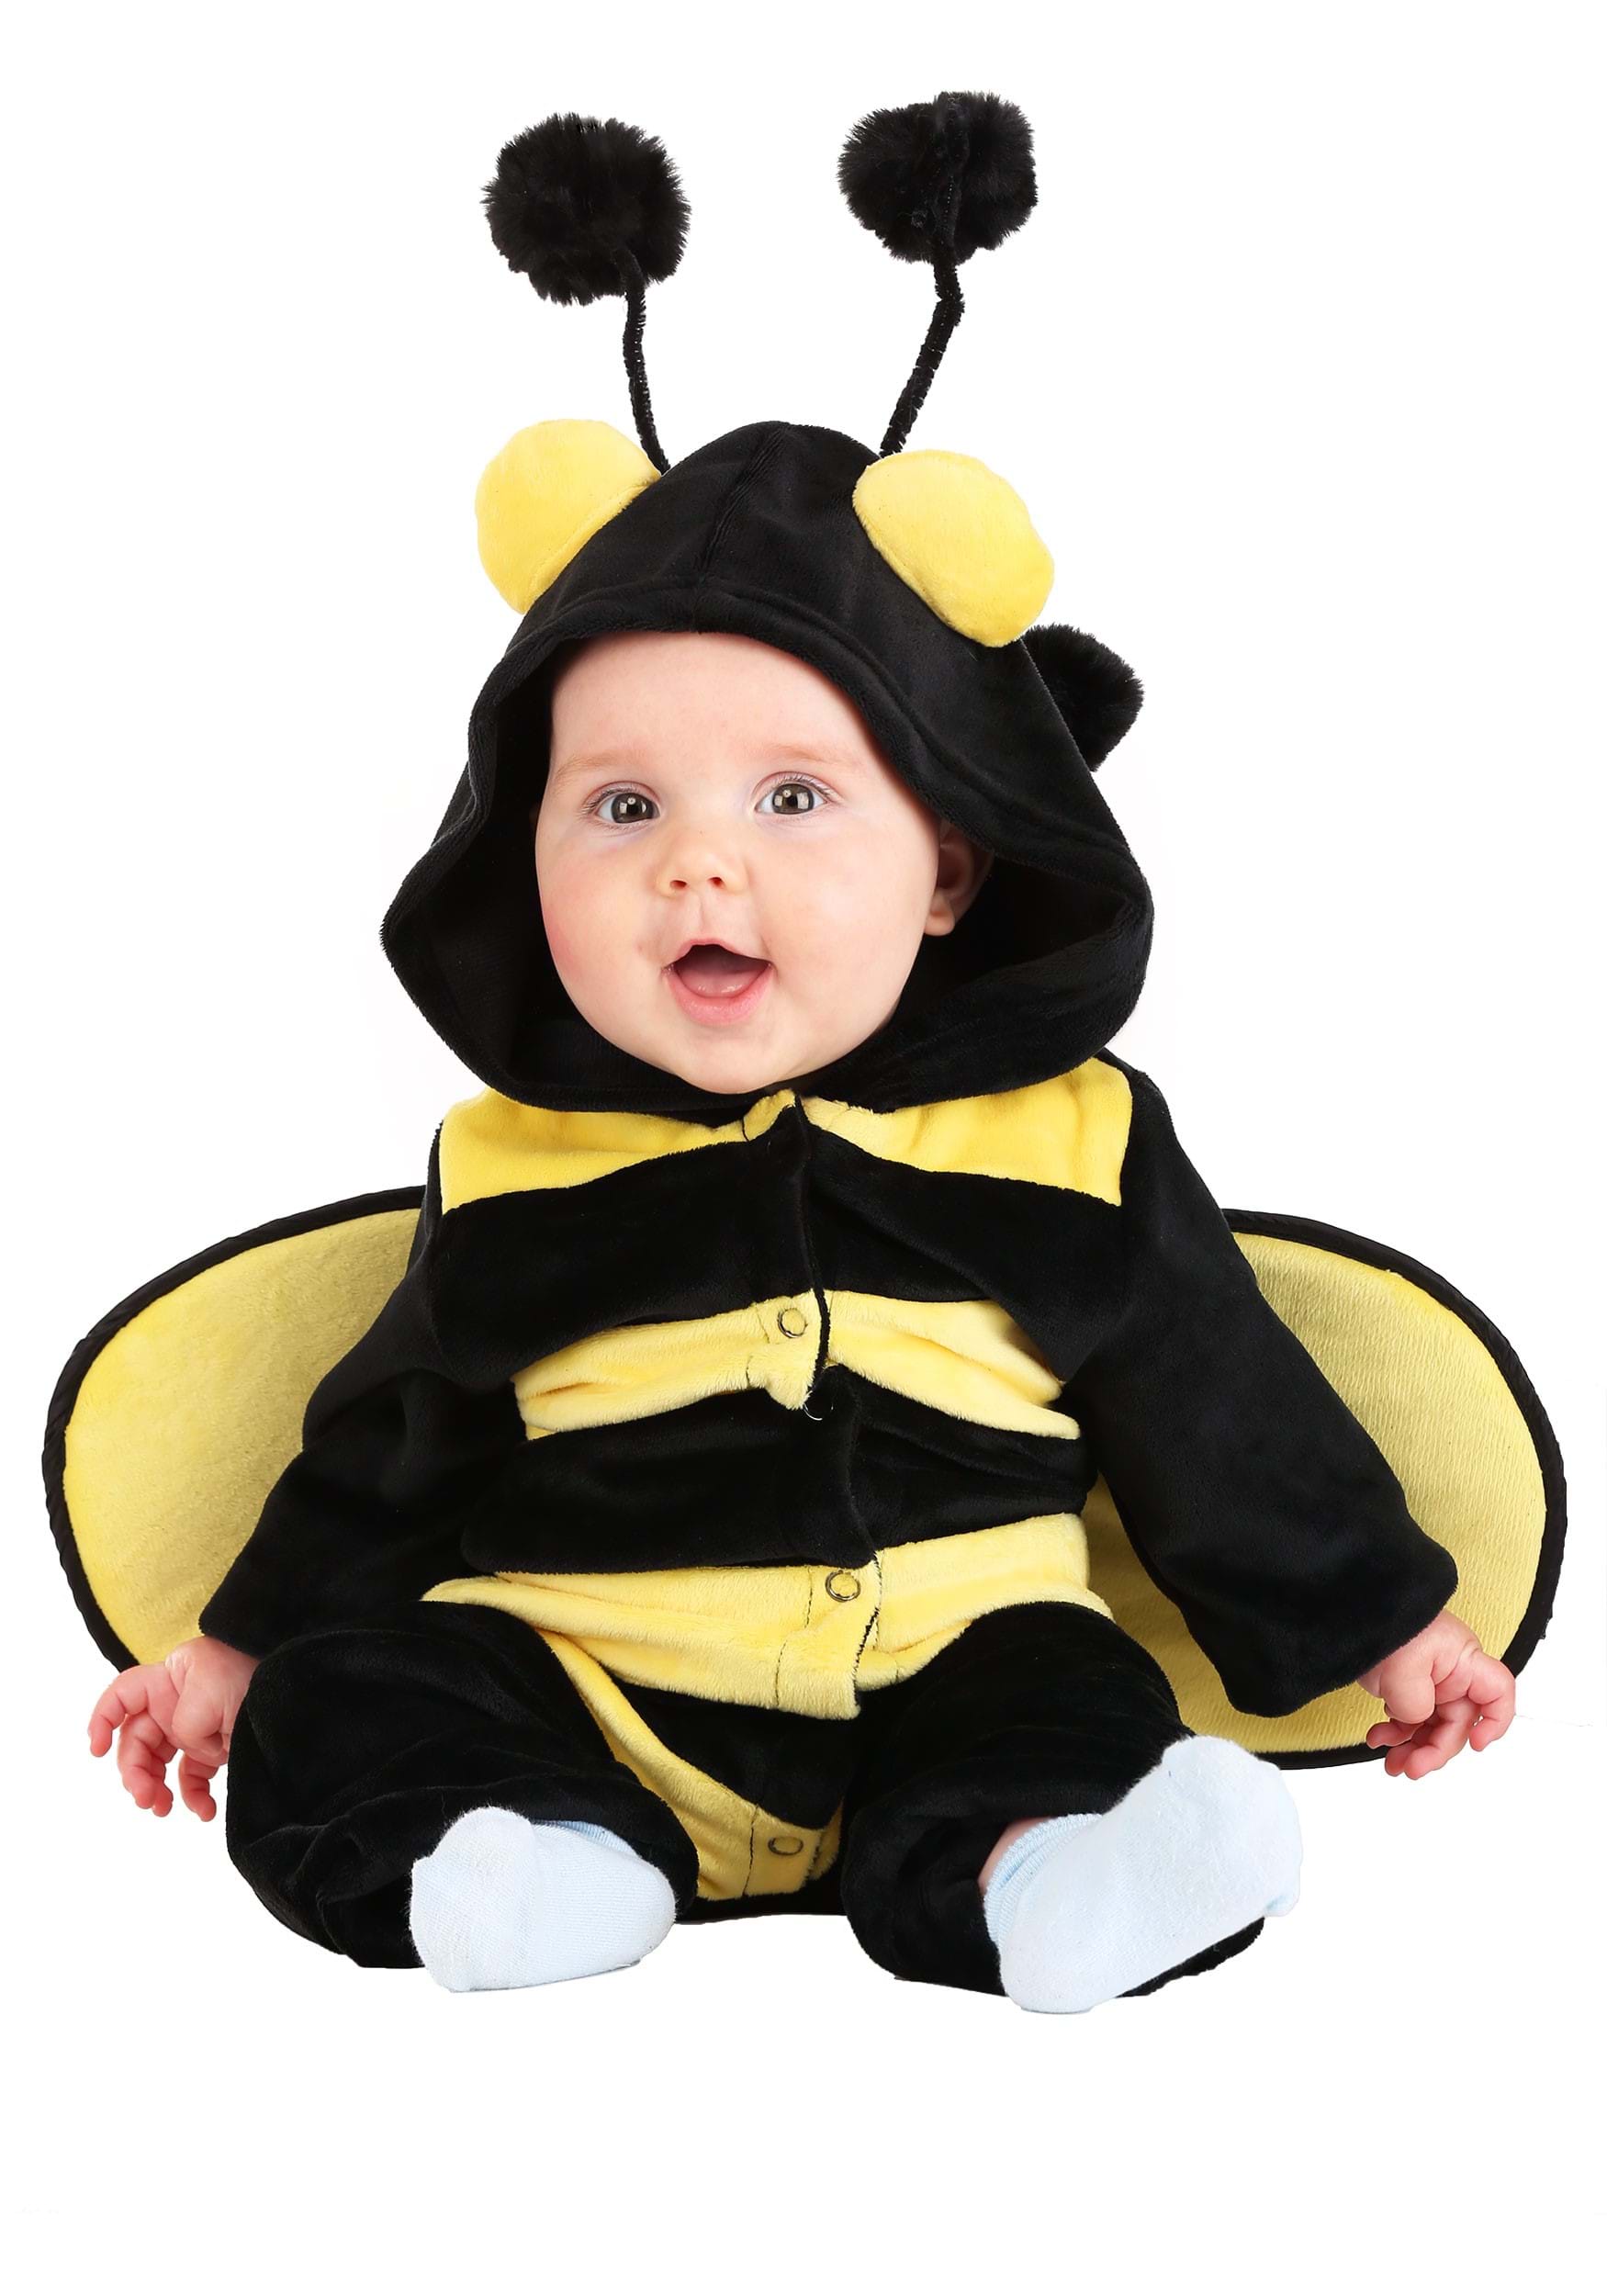 Infant’s Bumble Bee Costume